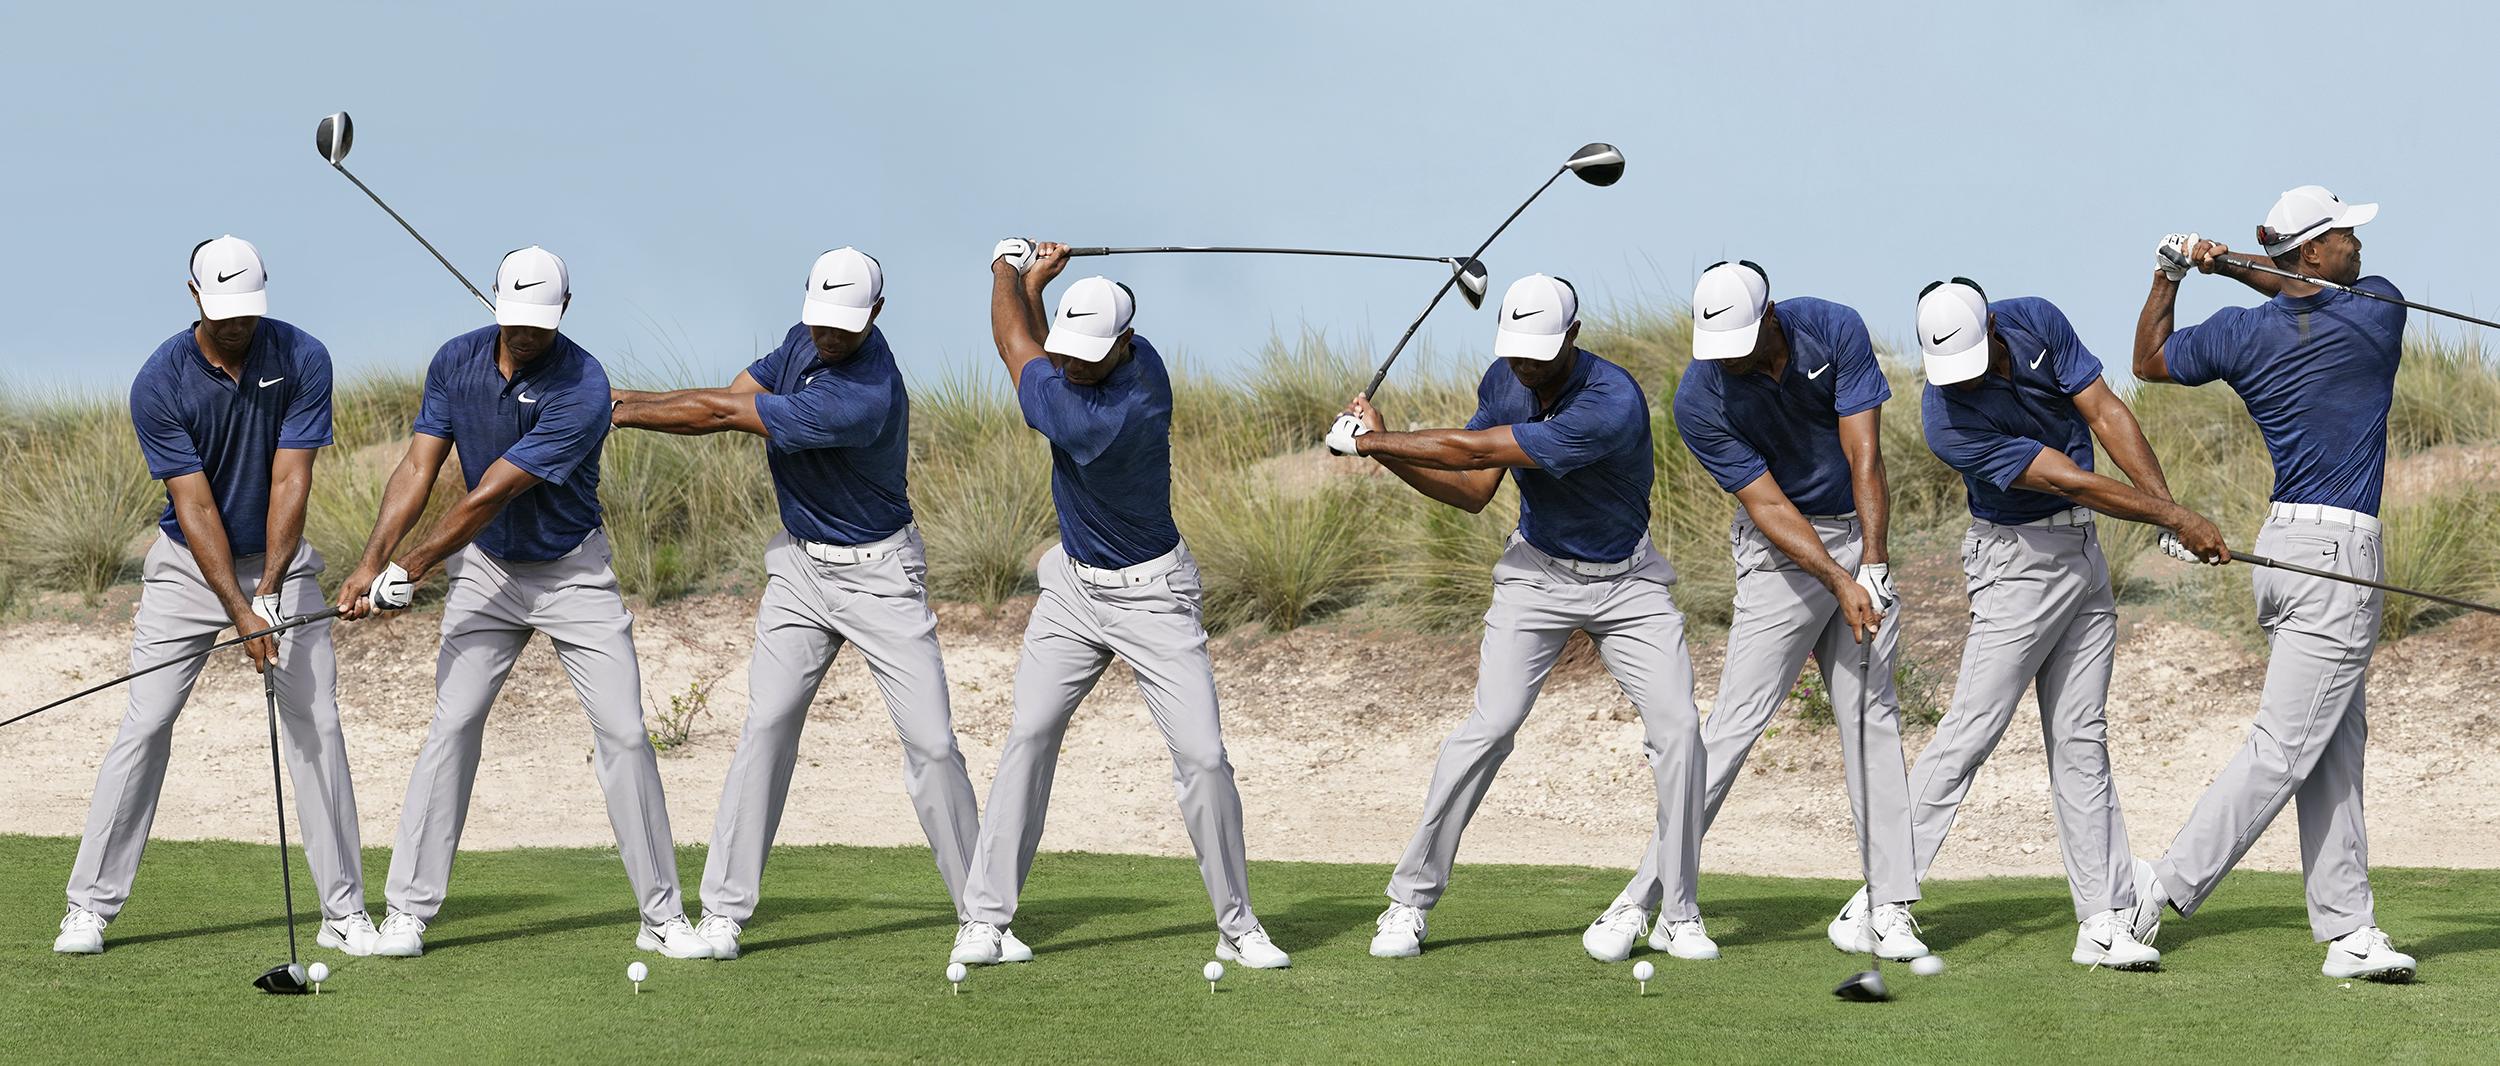 How to Swing a Golf Club - The Downswing
